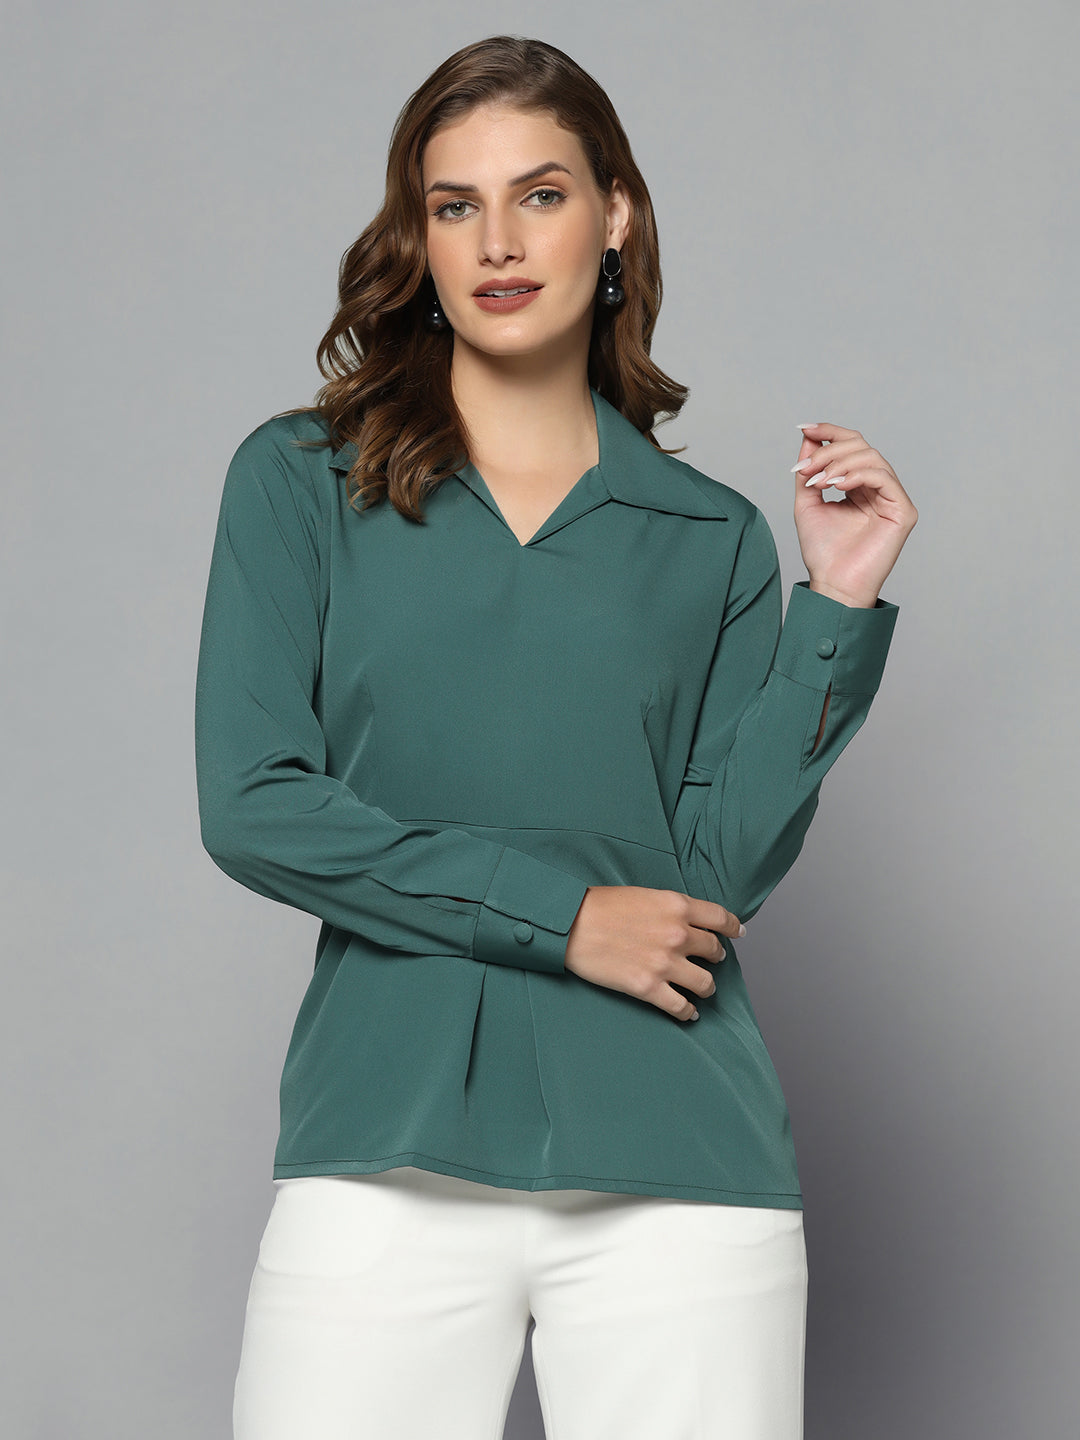 Collared Crepe Top - Green